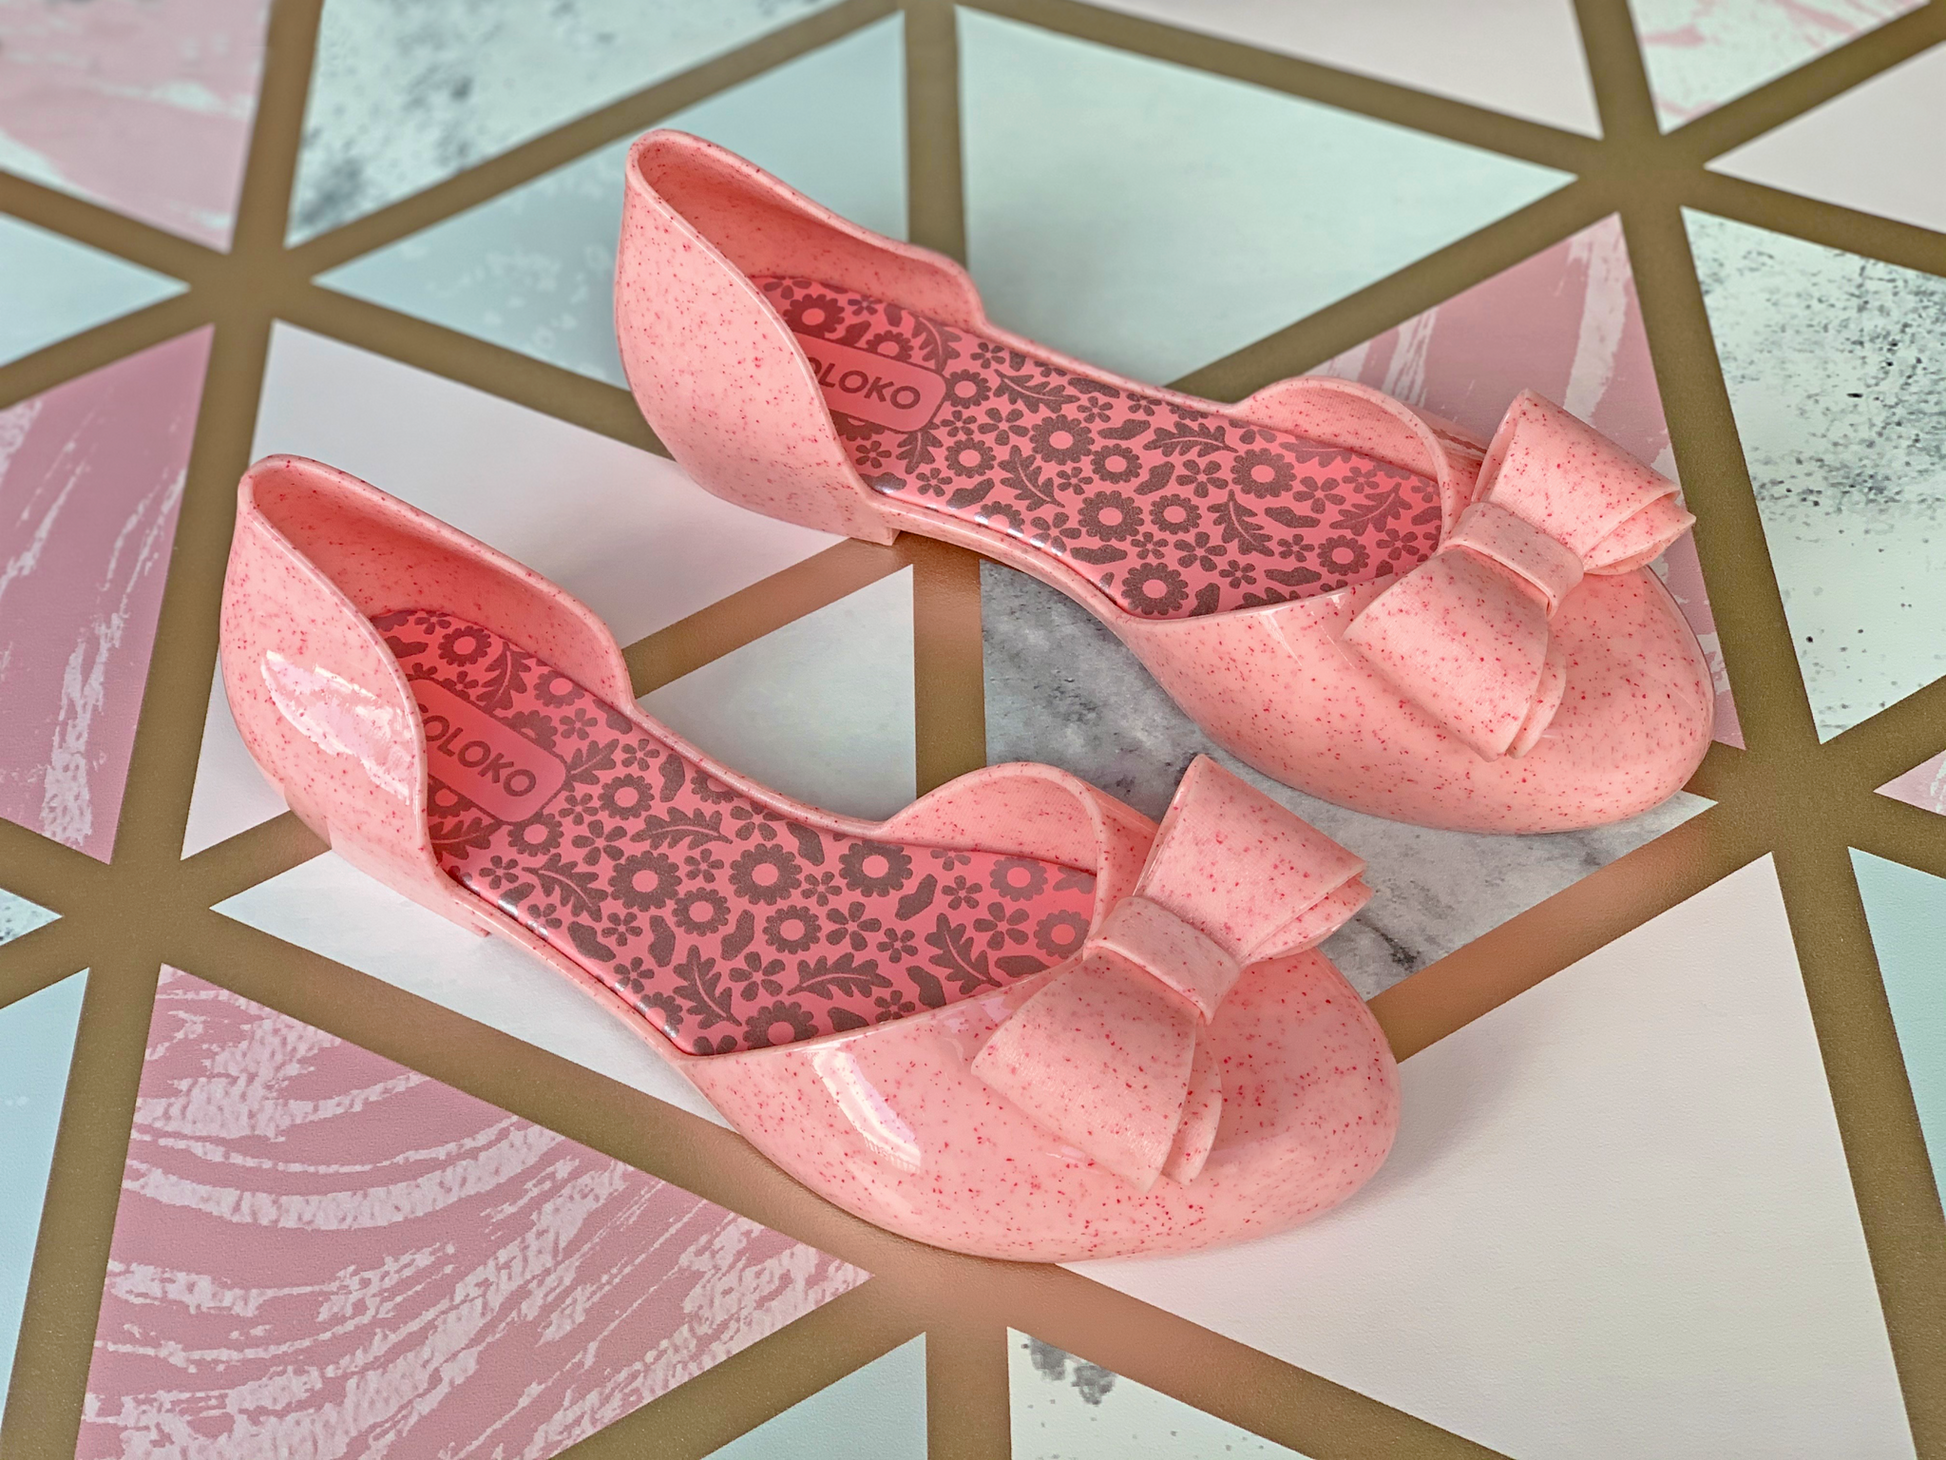 Coloko Blossom Marble Pink Pump Style Jelly Shoes